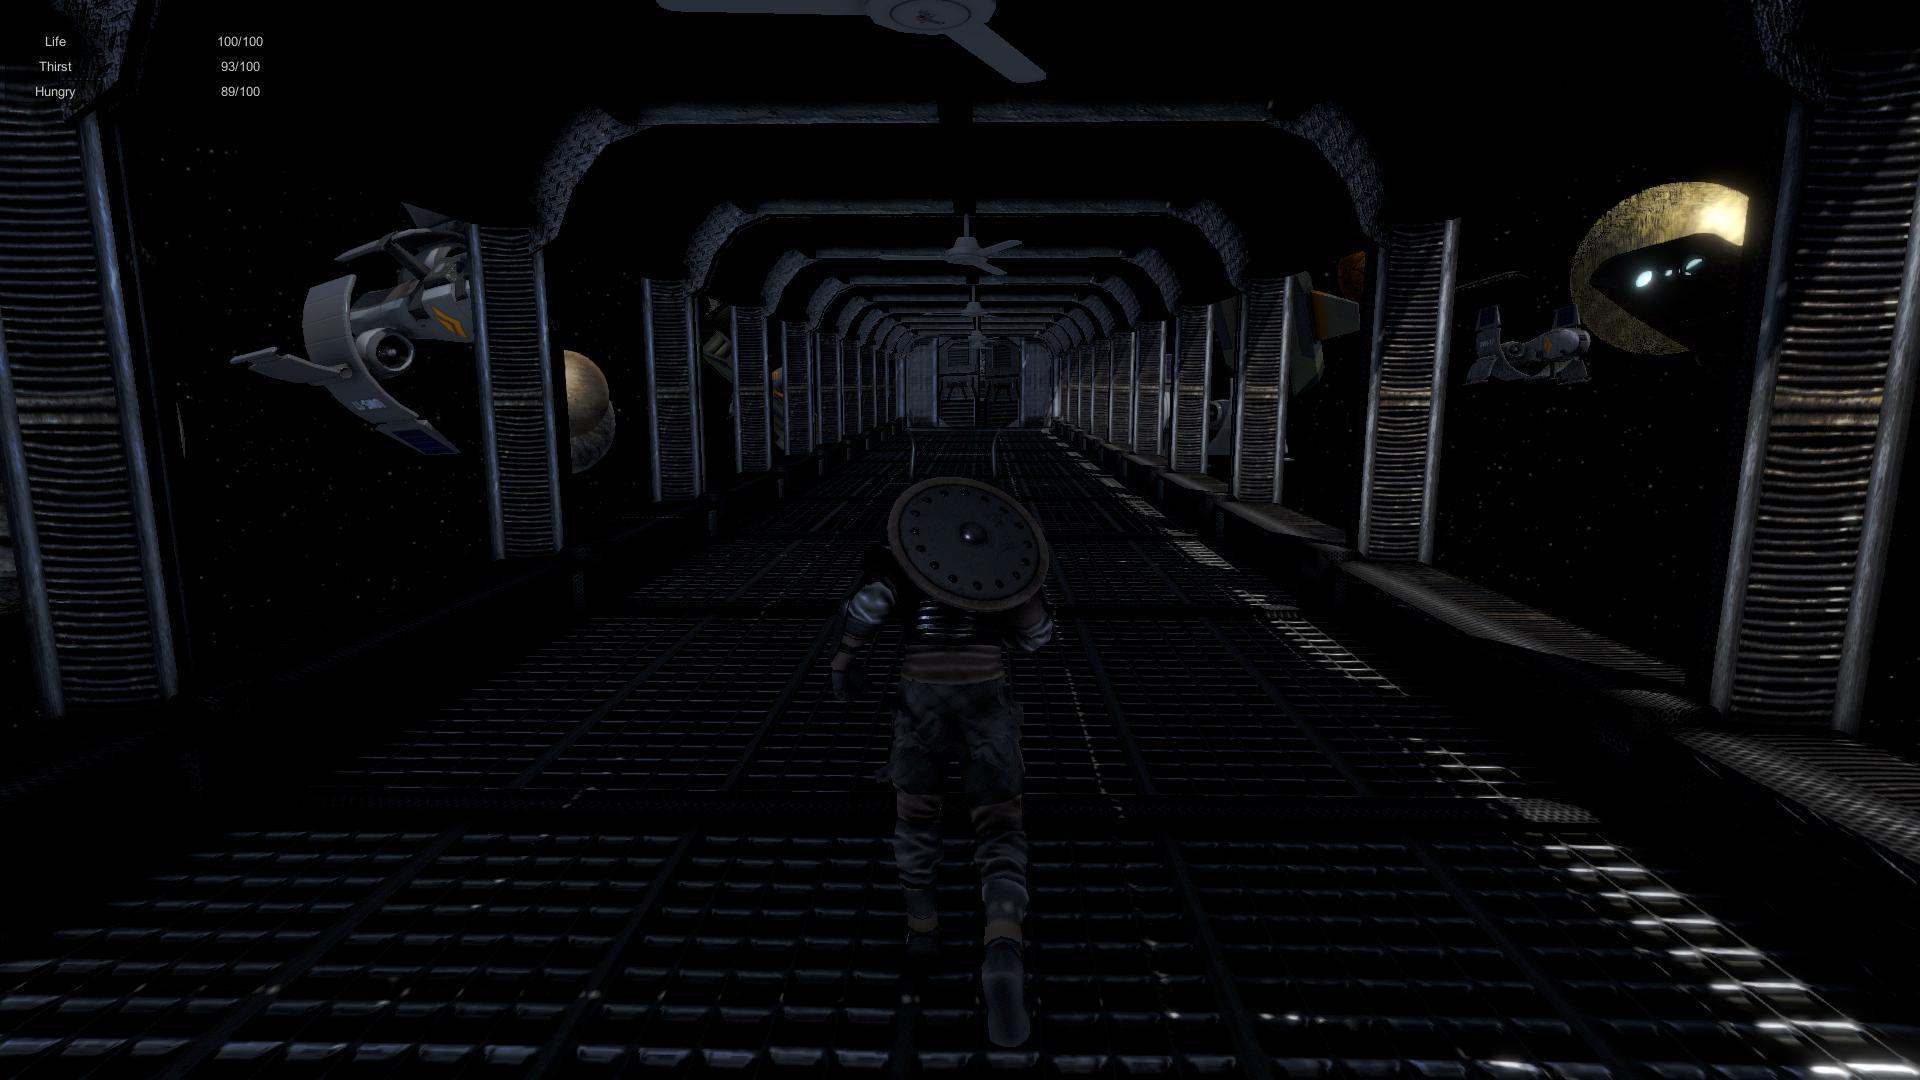 Screenshot №4 from game The Last Hope